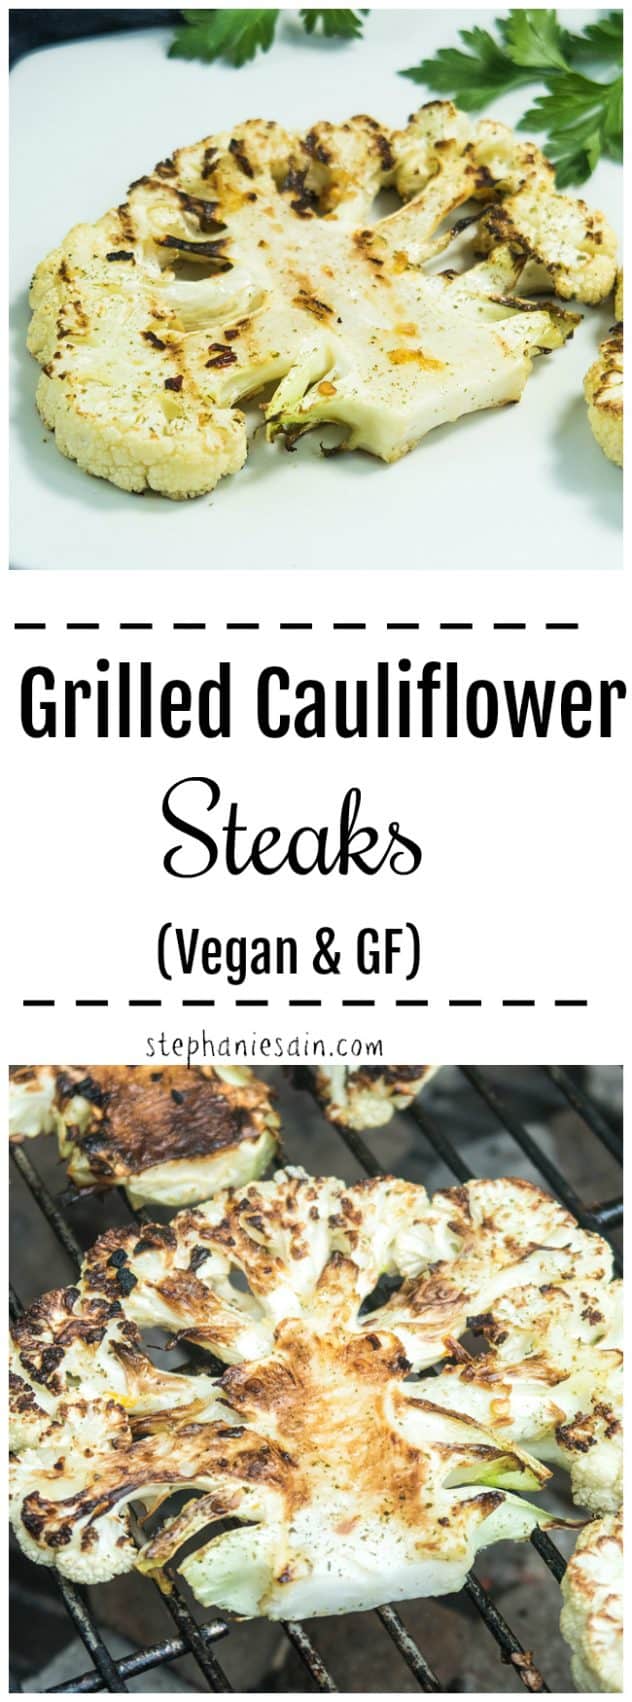 These Grilled Cauliflower Steaks are the perfect Vegan option for grilling out steaks. Super Easy to prepare and can be served lightly seasoned right off the grill or with BBQ sauce is really good. Great since you can prep these ahead and have ready when you're set to grill. Vegan & Gluten Free.